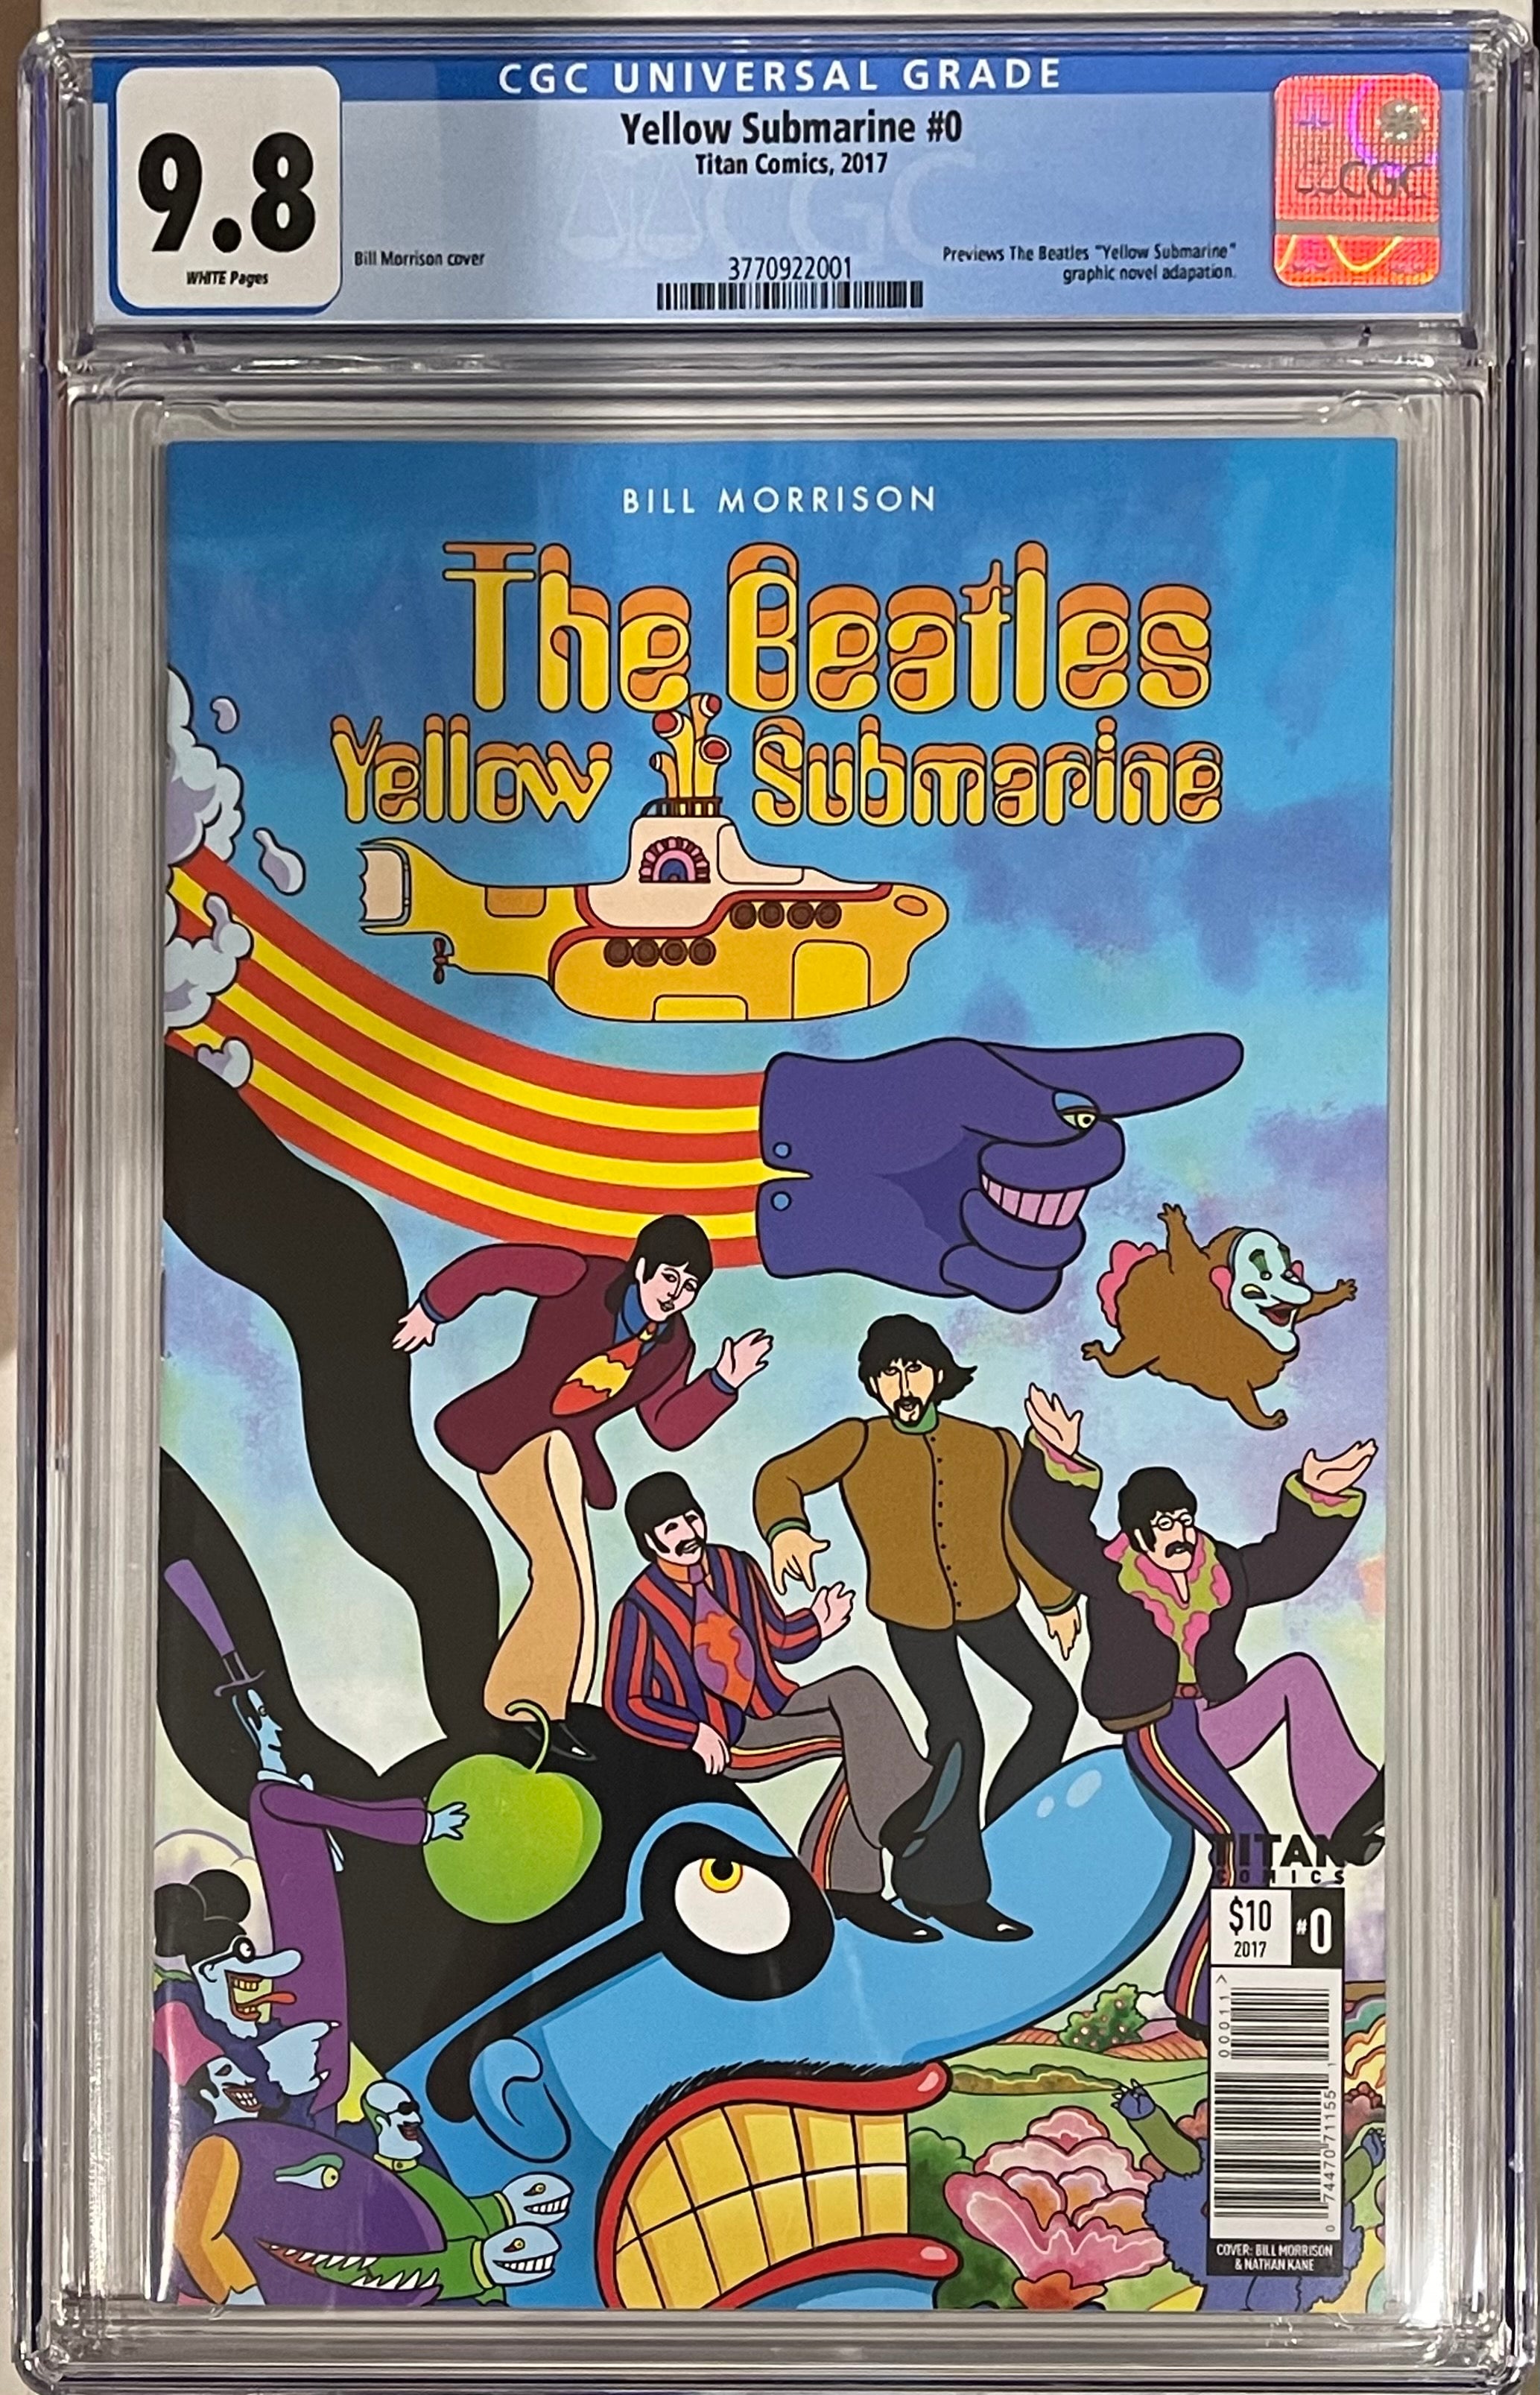 THE BEATLES YELLOW SUBMARINE #0 PREVIEW BOOK CGC 9.8